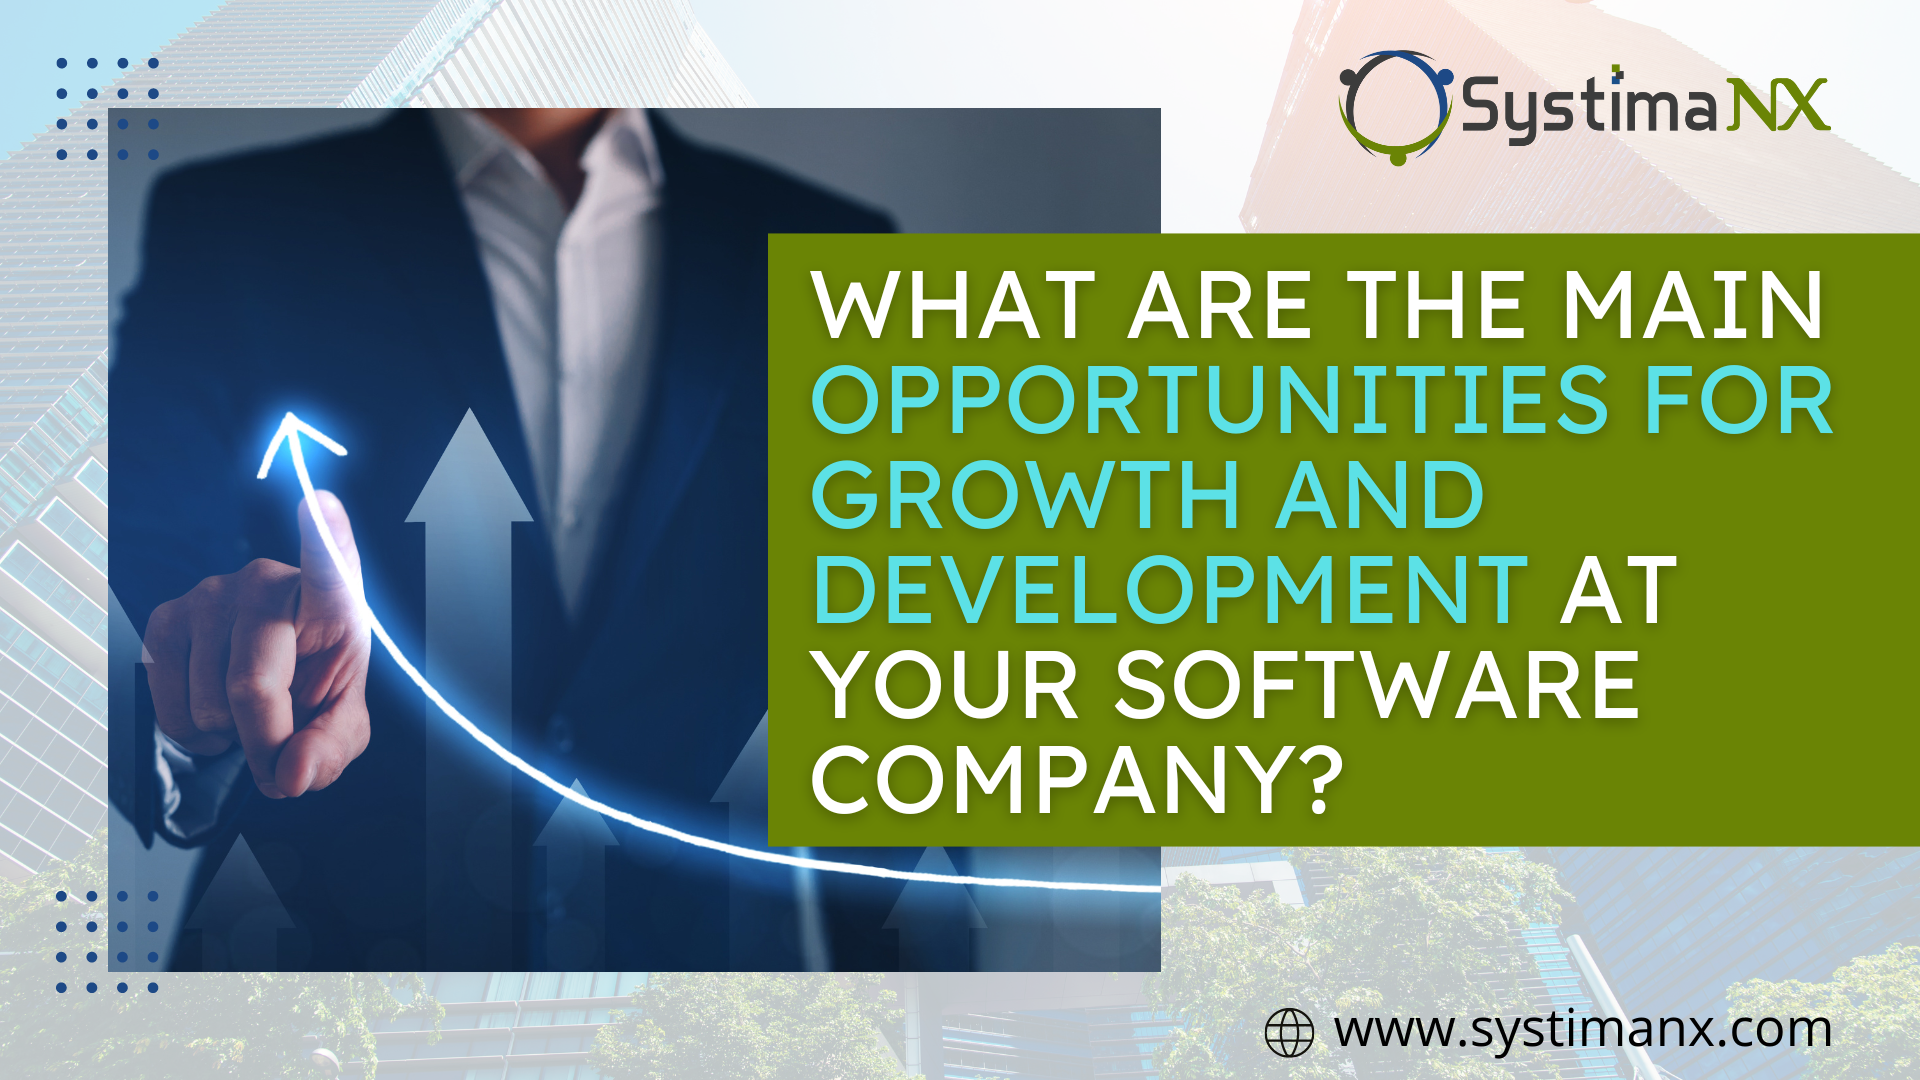 What are the main opportunities for growth and development at your software company?